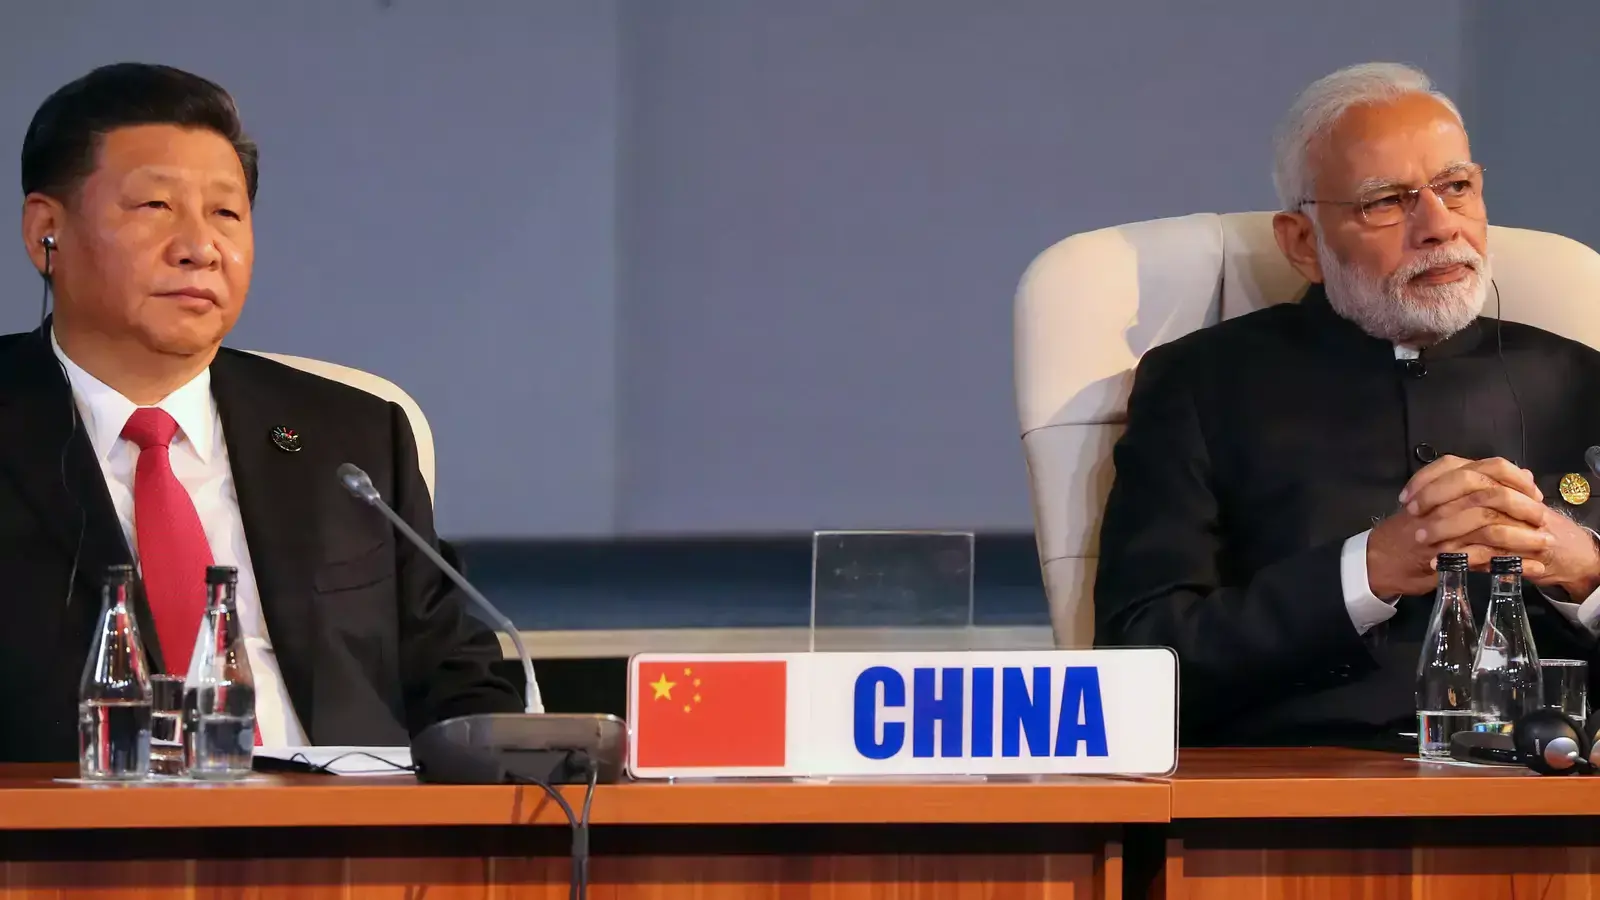 Indian Prime Minister Narendra Modi and China's President Xi Jinping attend the BRICS summit meeting in Johannesburg.